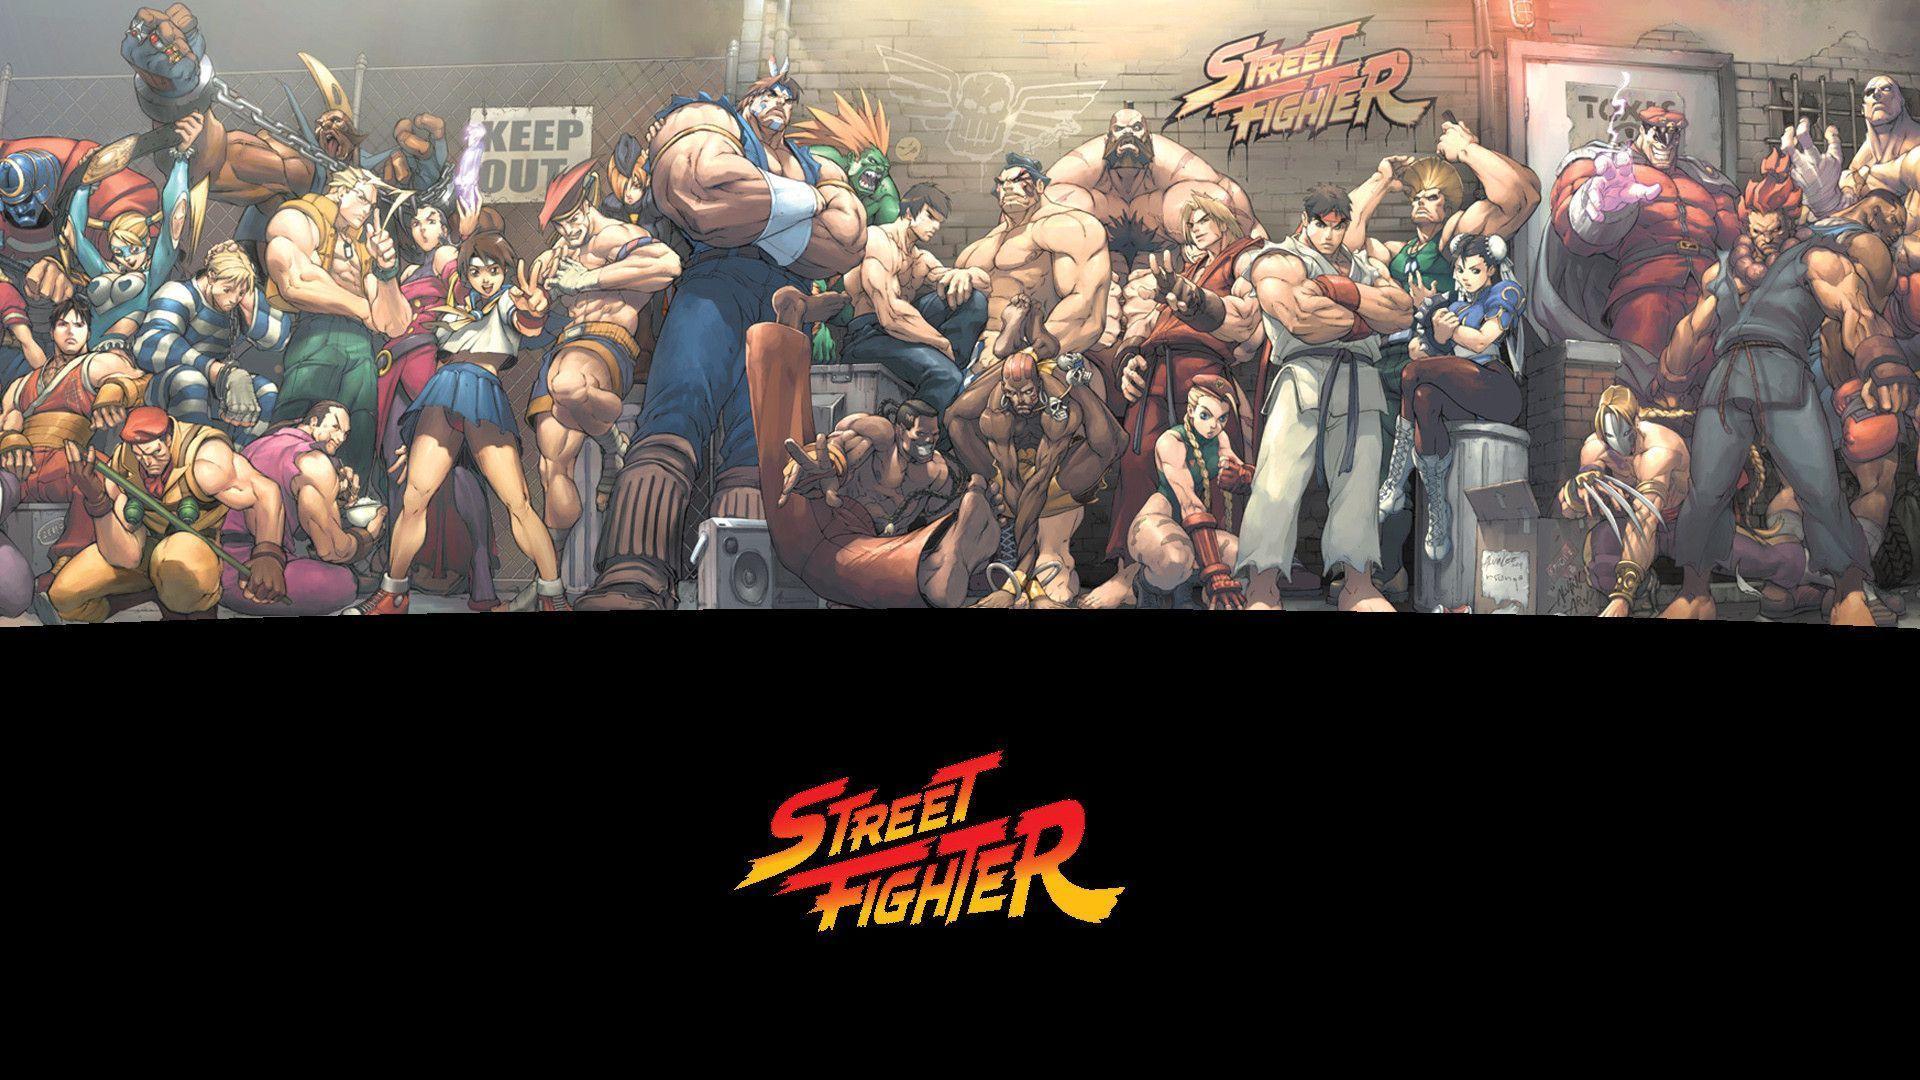 Free download Street Fighter HD Wallpapers [1920x1080] for your 1920x1080